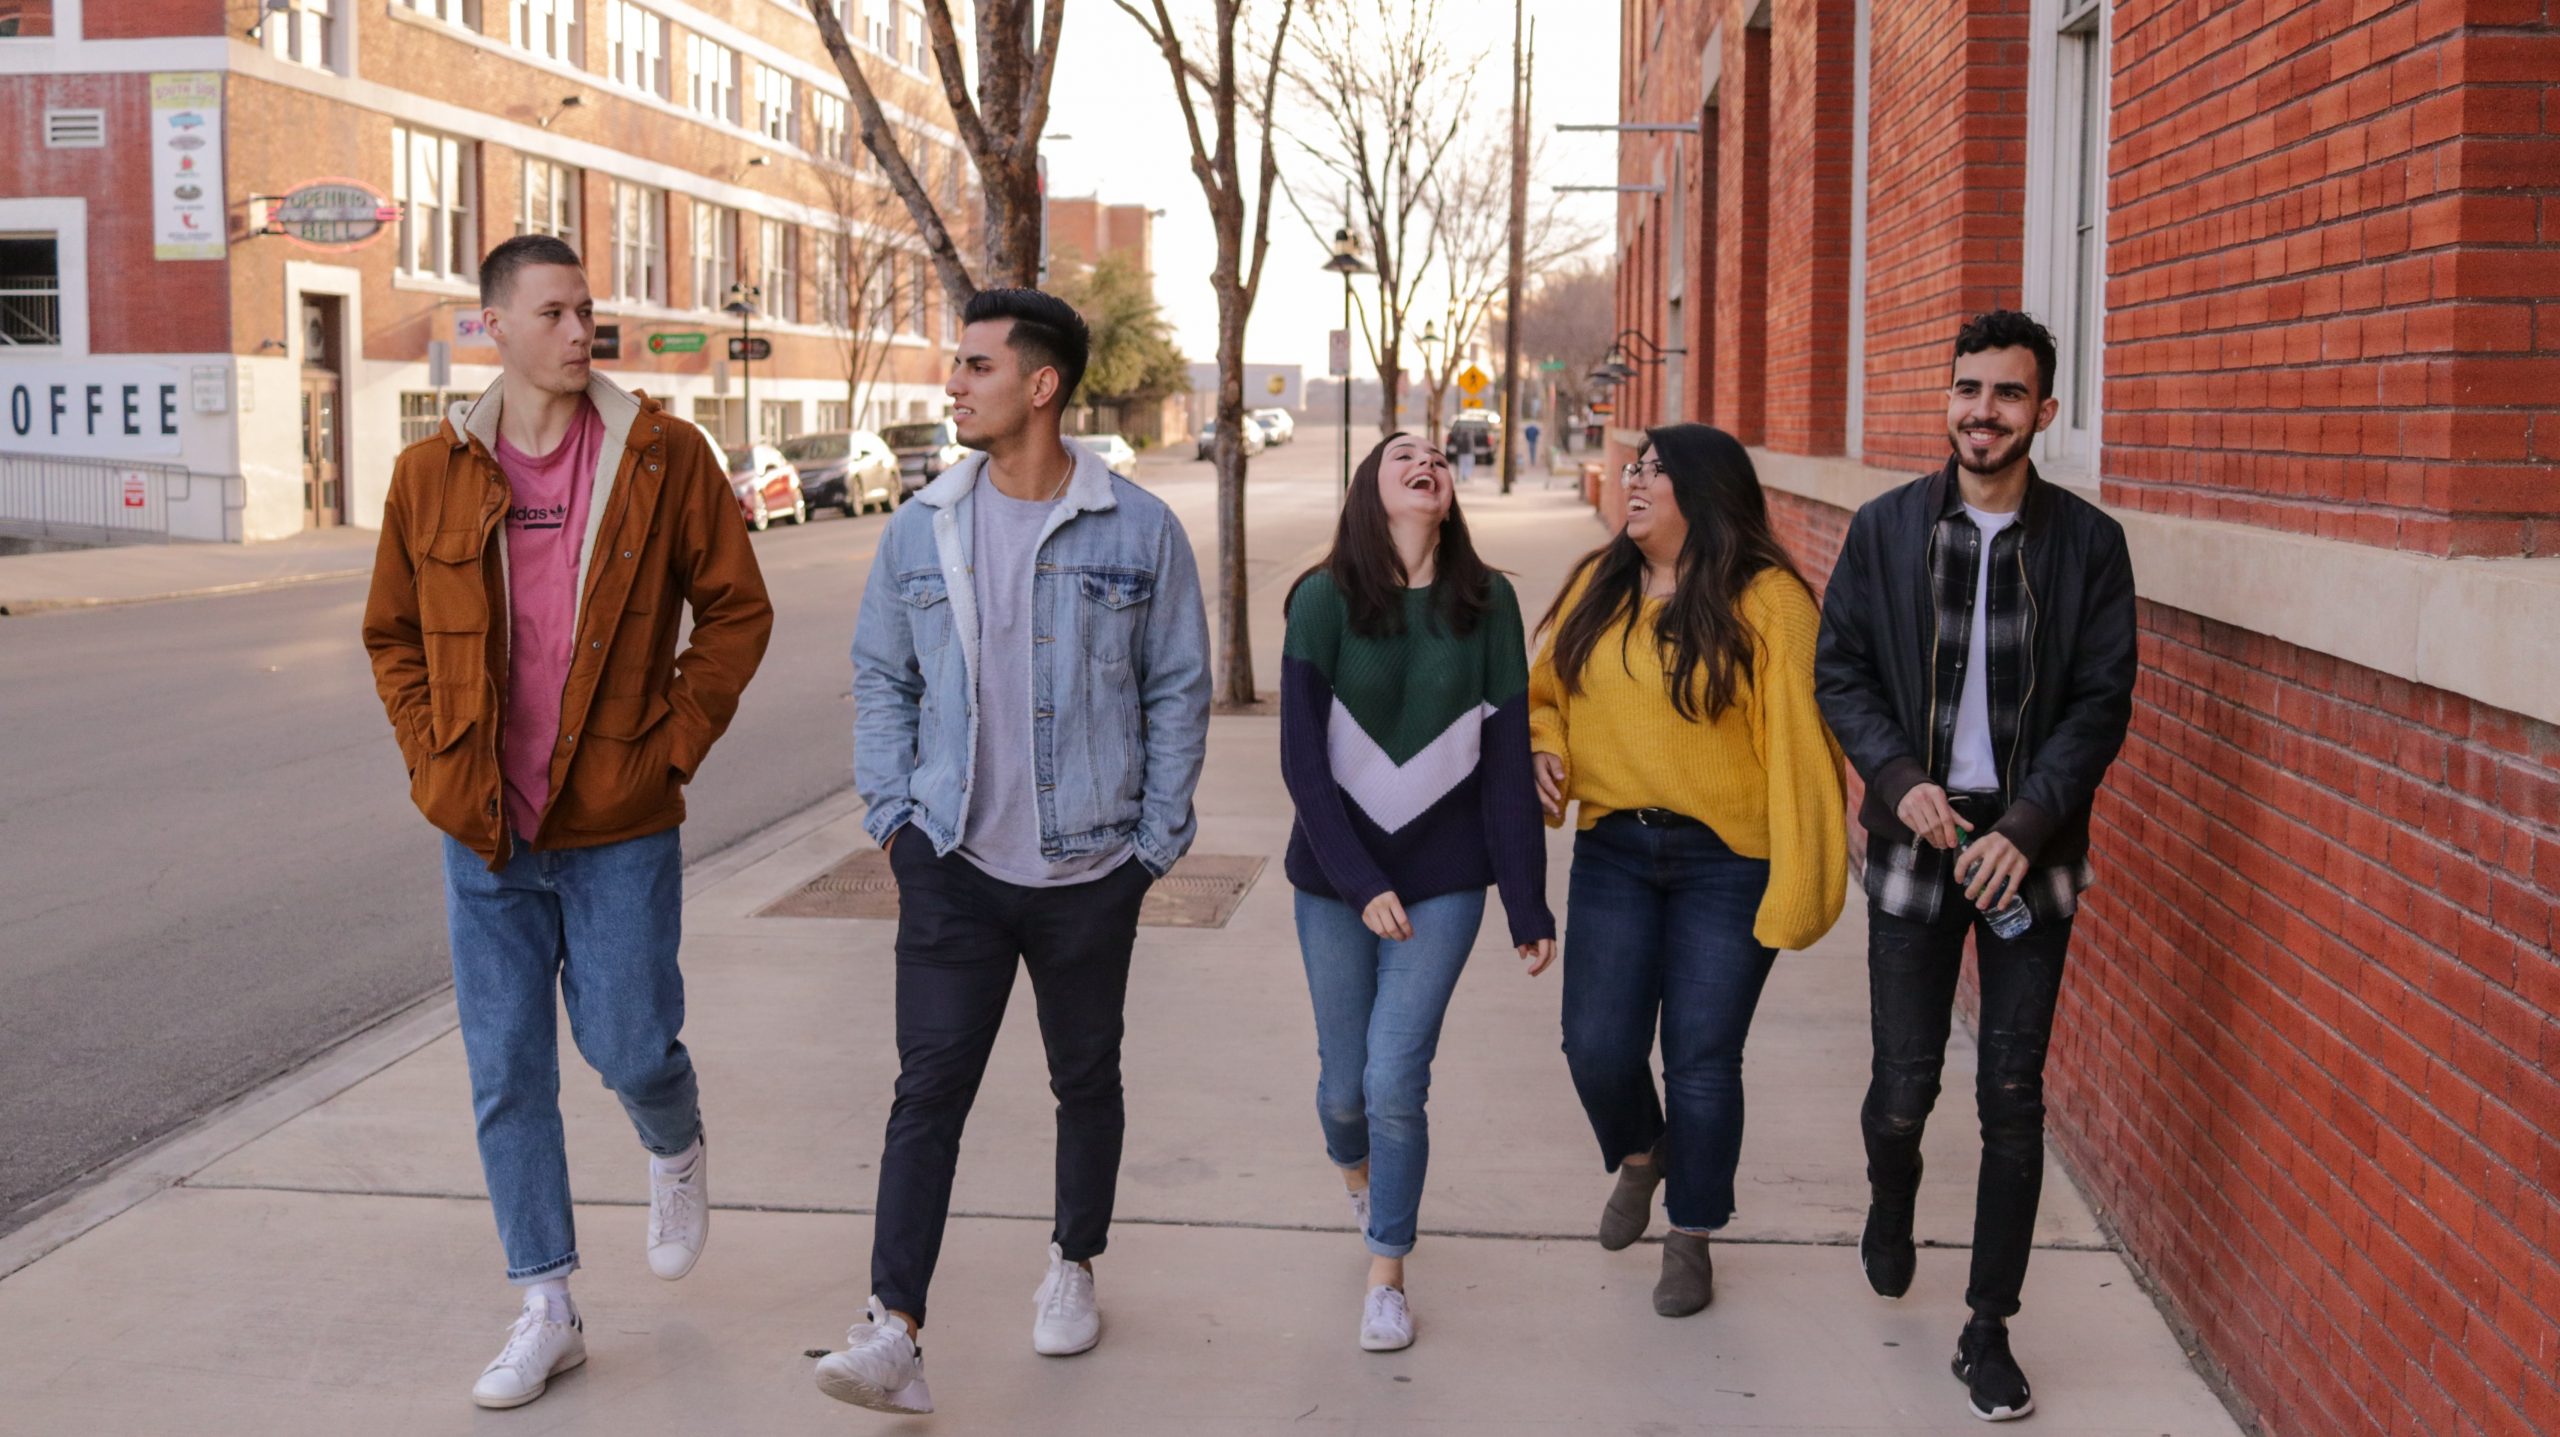 Five college/university-aged students walking down a sidewalk together talking and laughing.